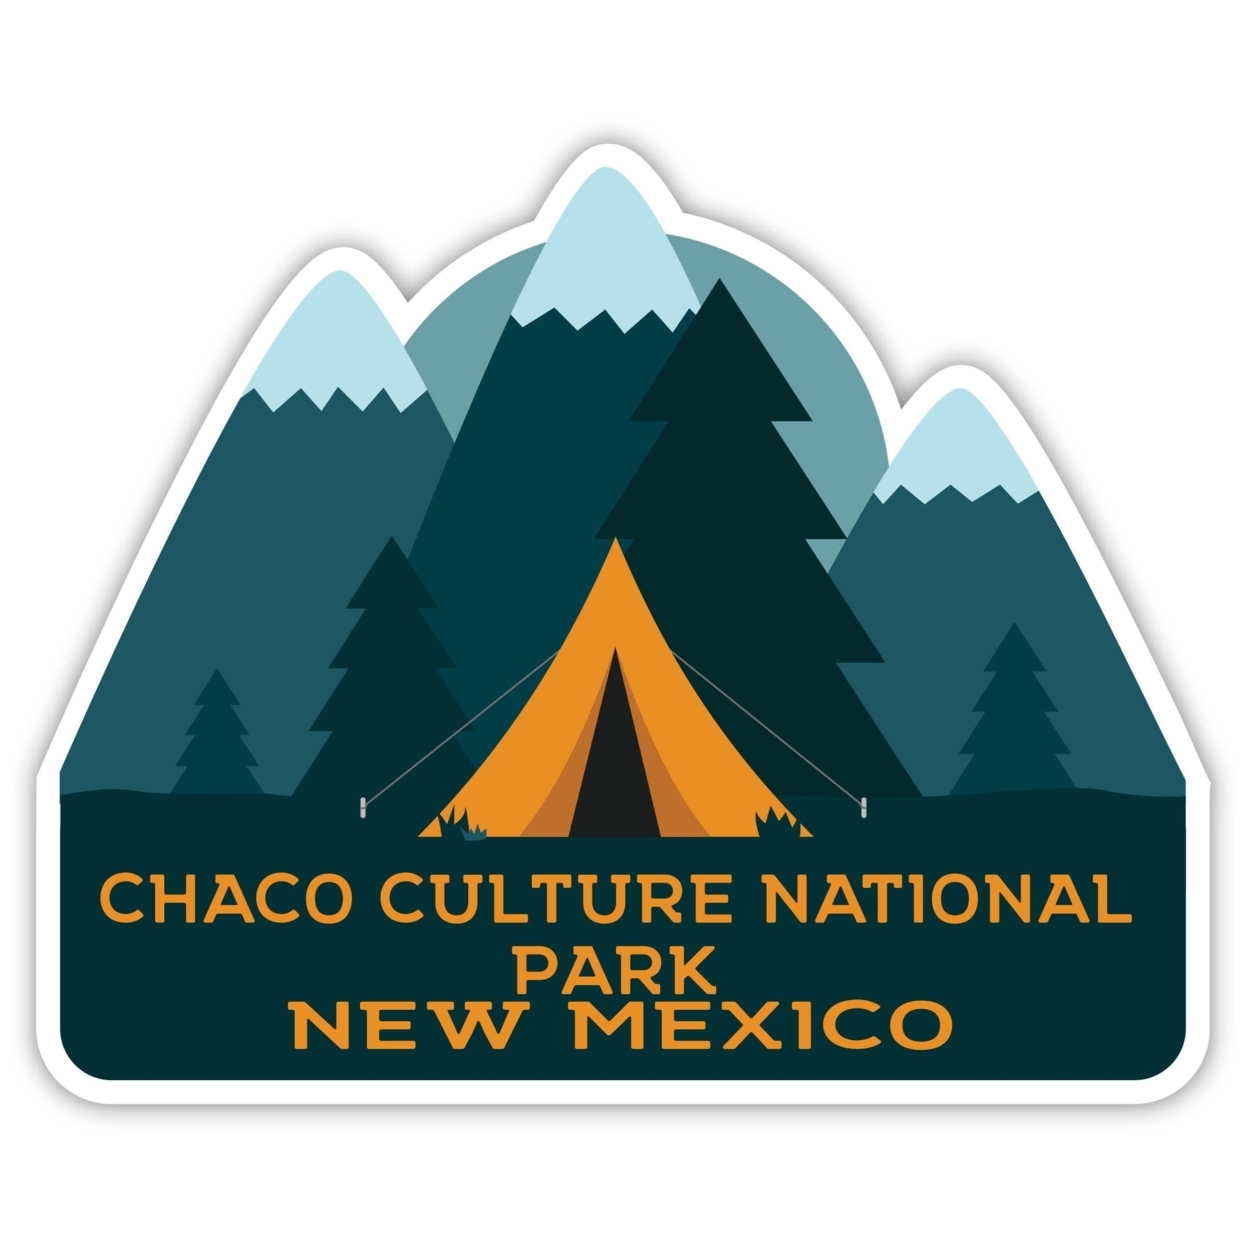 Chaco Culture National Park New Mexico Souvenir Decorative Stickers (Choose Theme And Size) - 4-Pack, 4-Inch, Tent